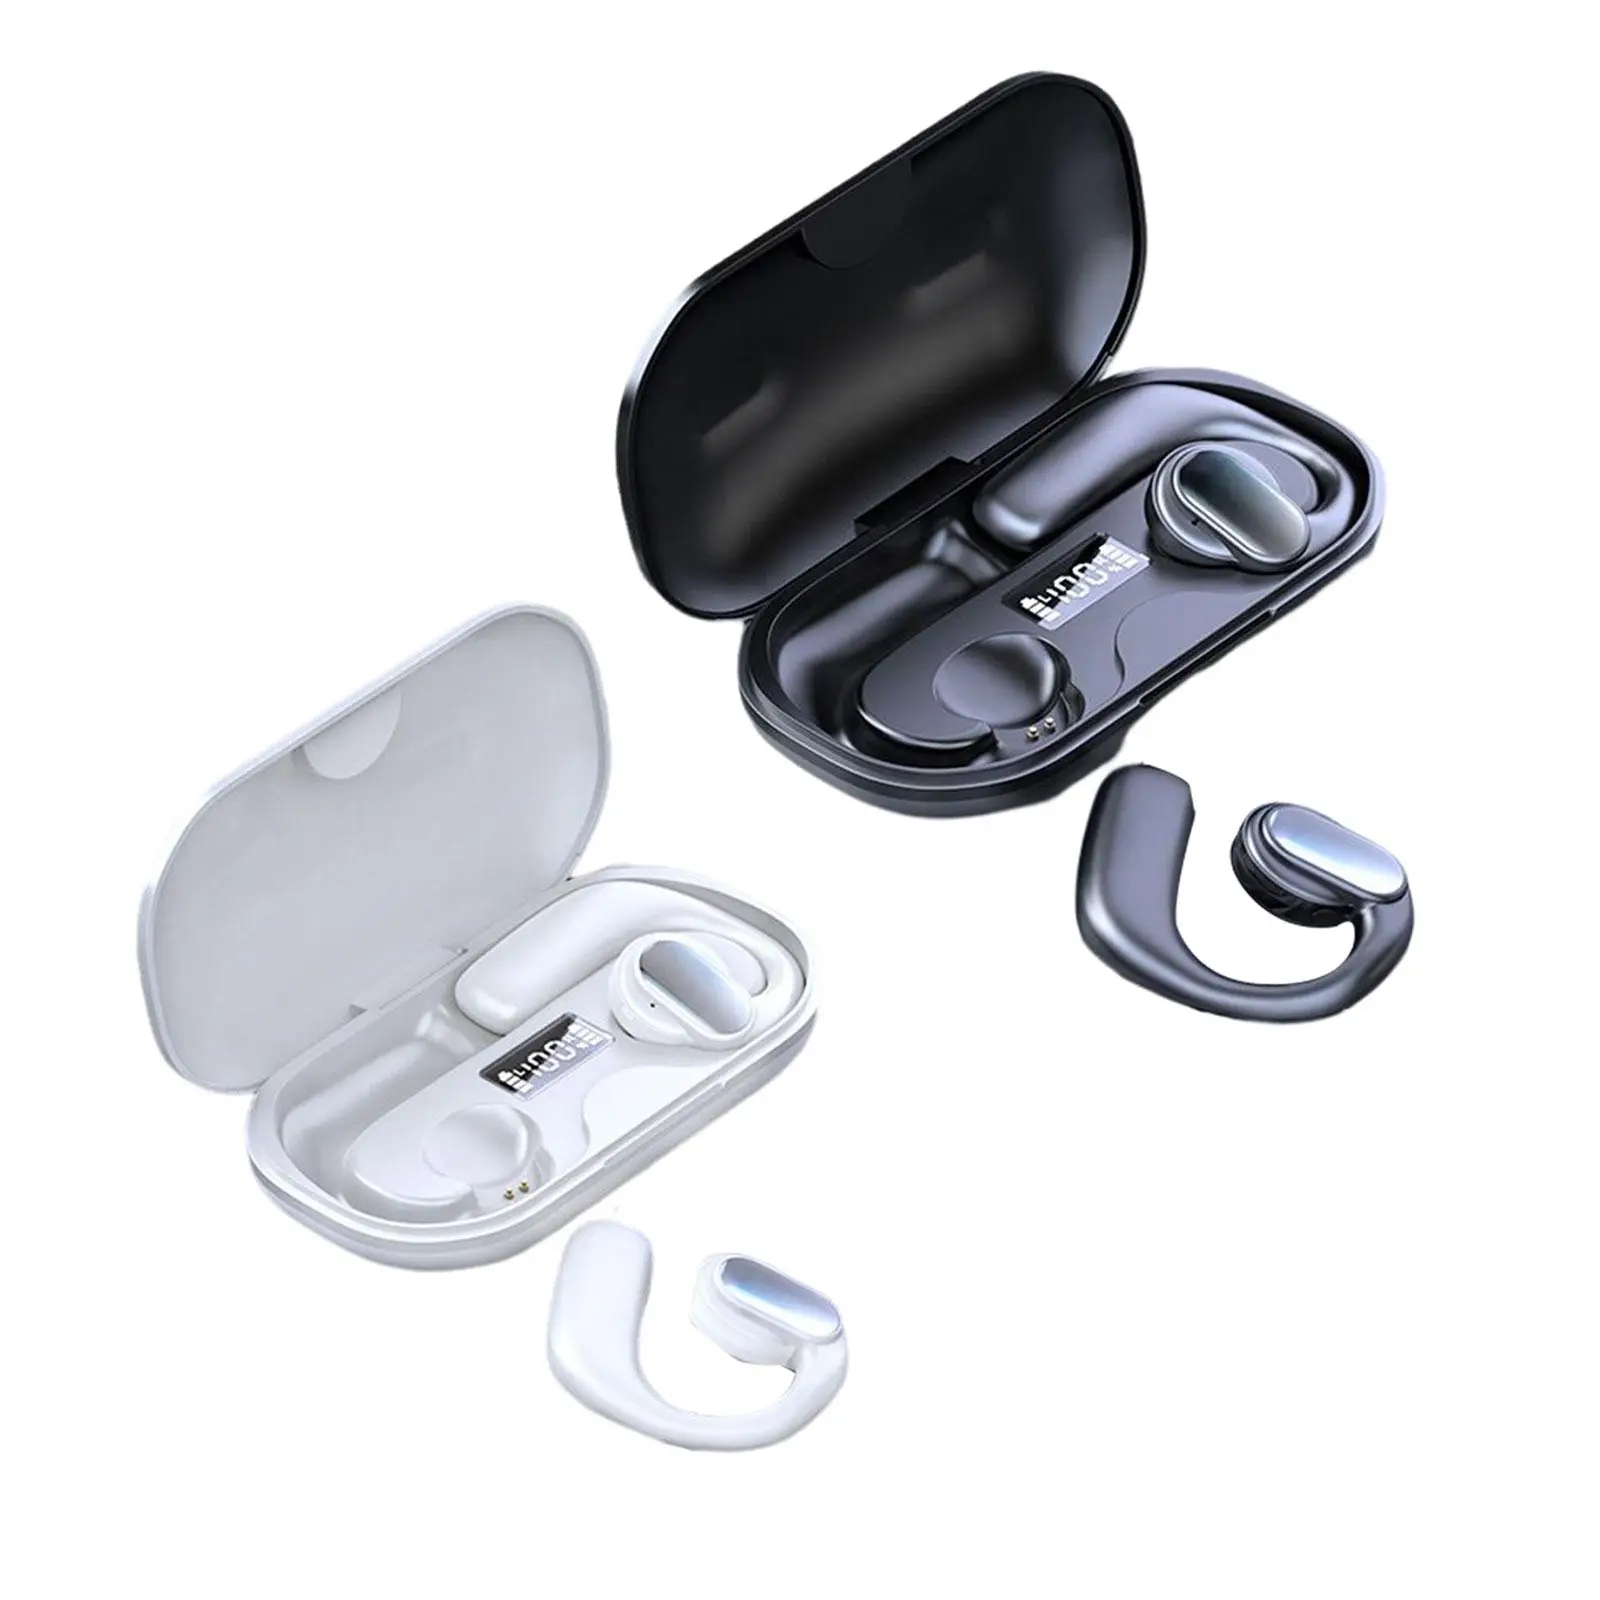 Air Conduction Headphone Ear Hook Earphones Handsfree Calling with Charging Case Noise Cancelling Headset for Working Travel Gym